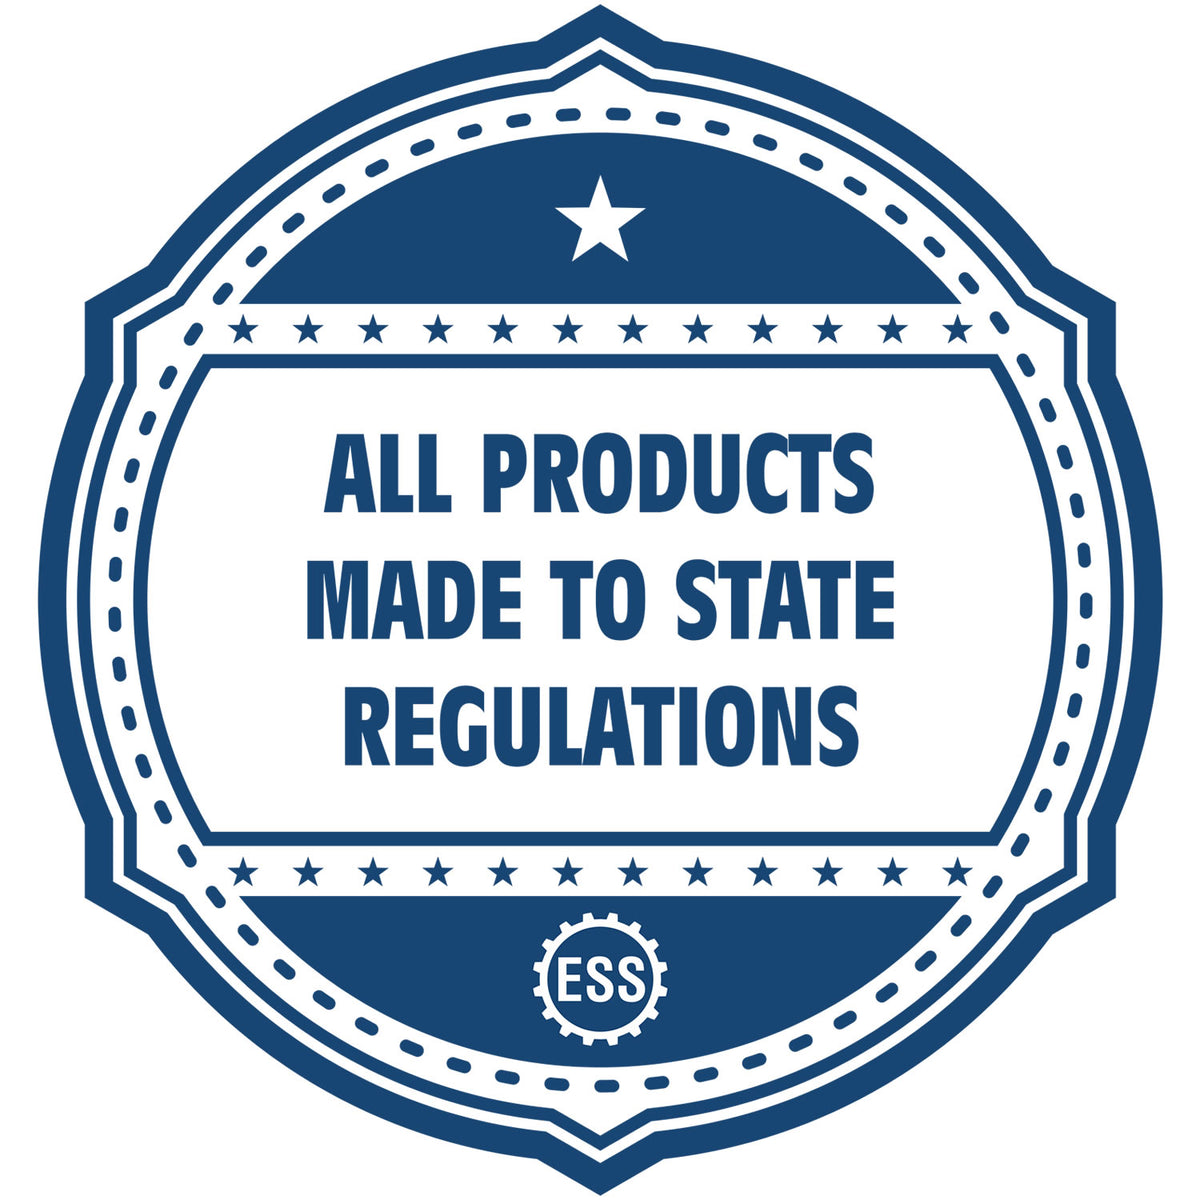 An icon or badge element for the Long Reach Oklahoma PE Seal showing that this product is made in compliance with state regulations.